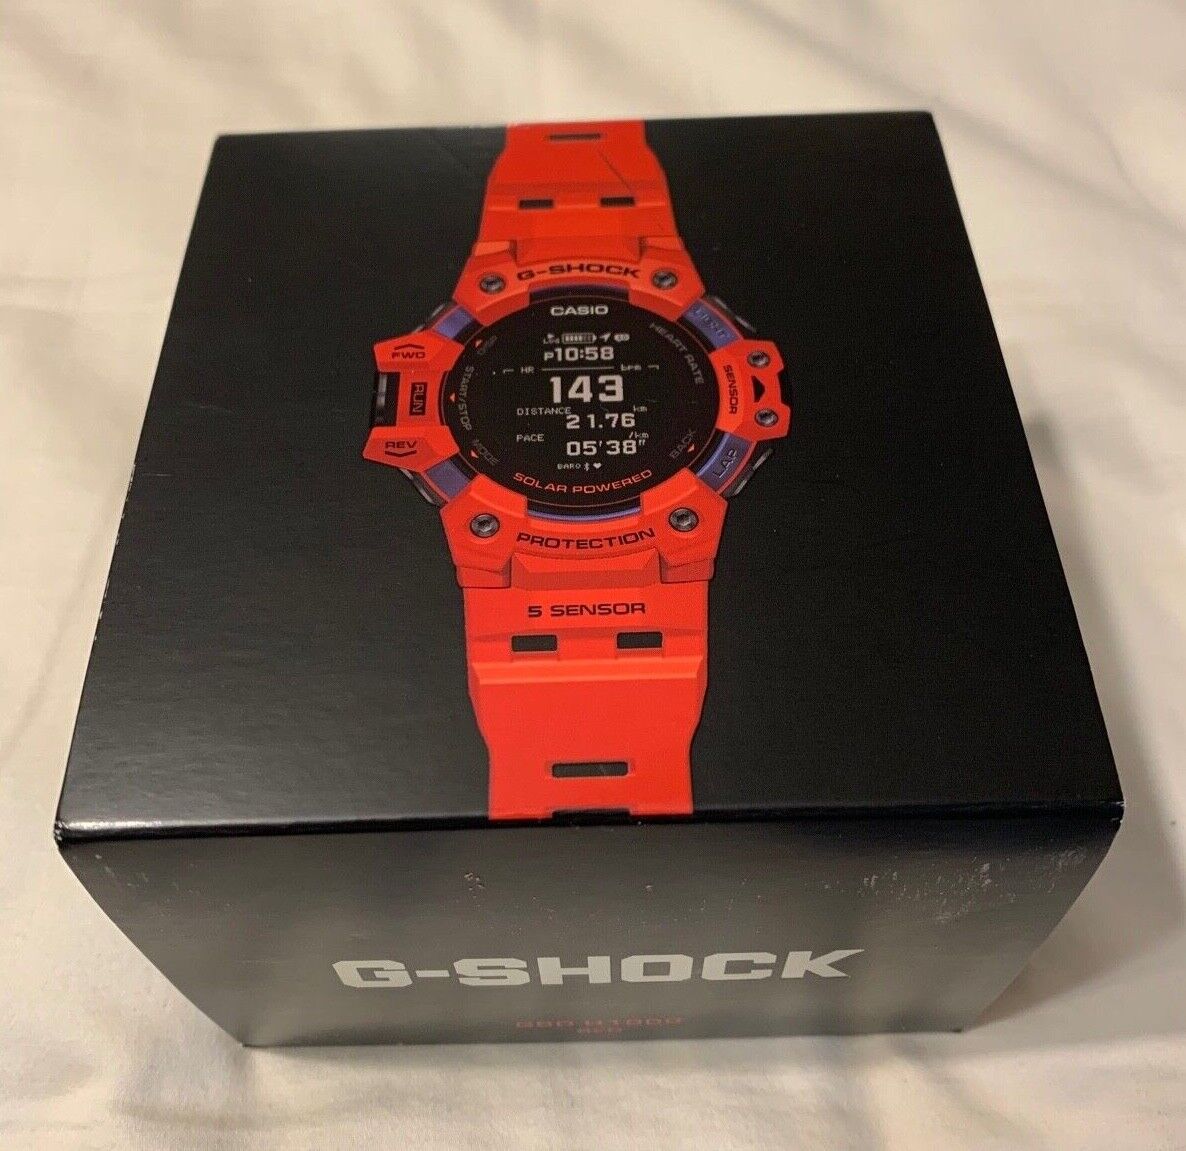 G-SHOCK G-SQUAD 55 mm Black Resin Case with Red Resin Strap Wristwatch